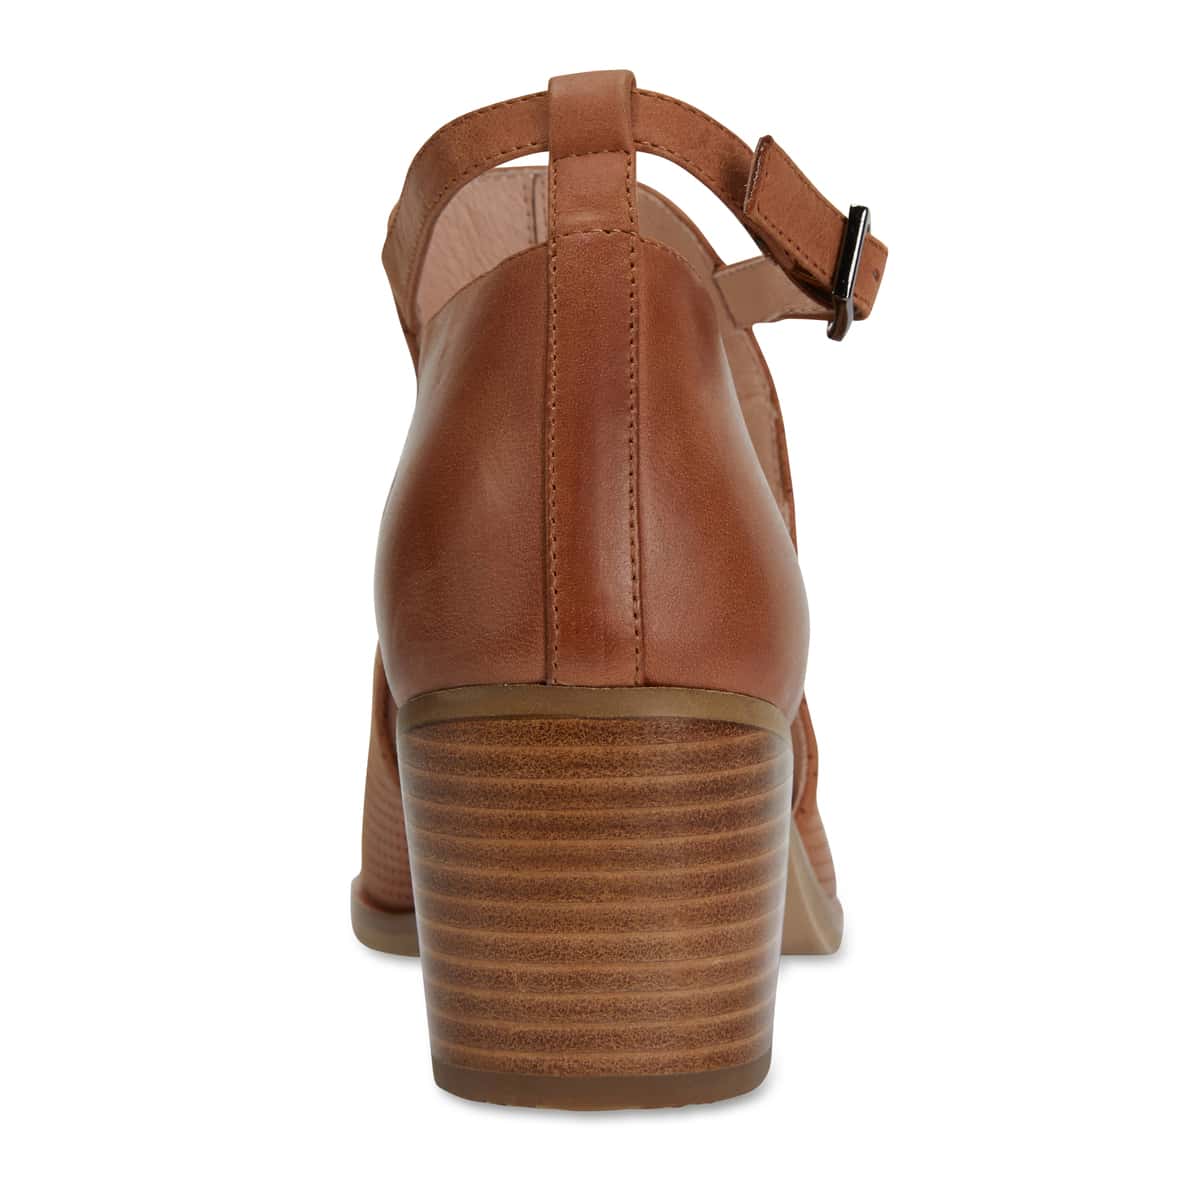 Divide Boot in Tan Leather